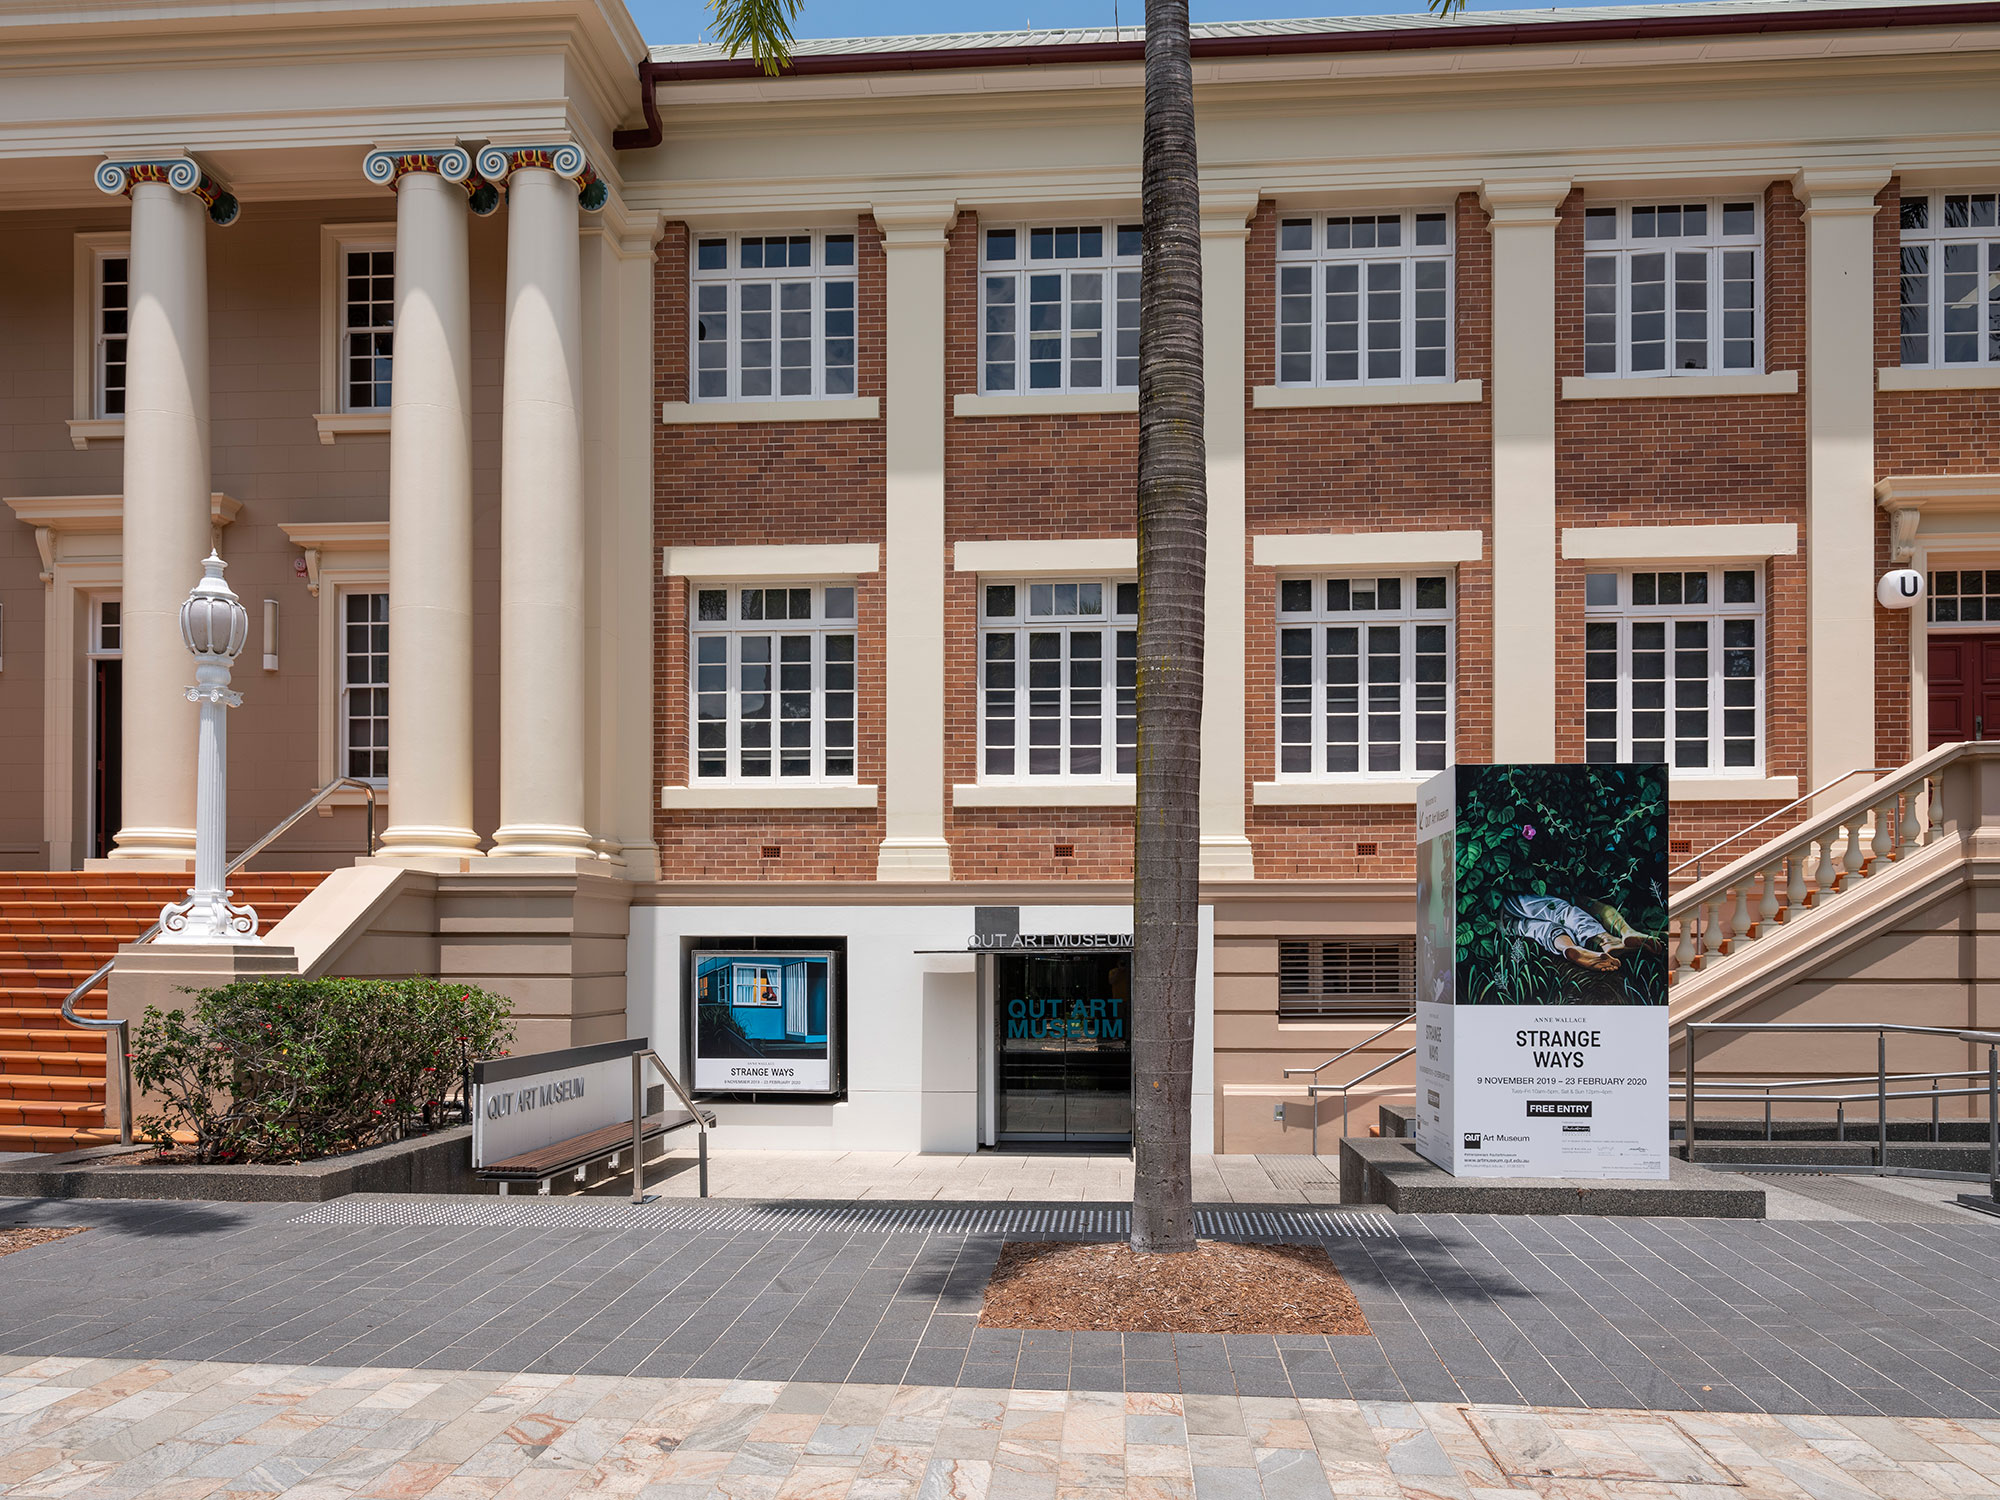 Our sister gallery: QUT Art Museum